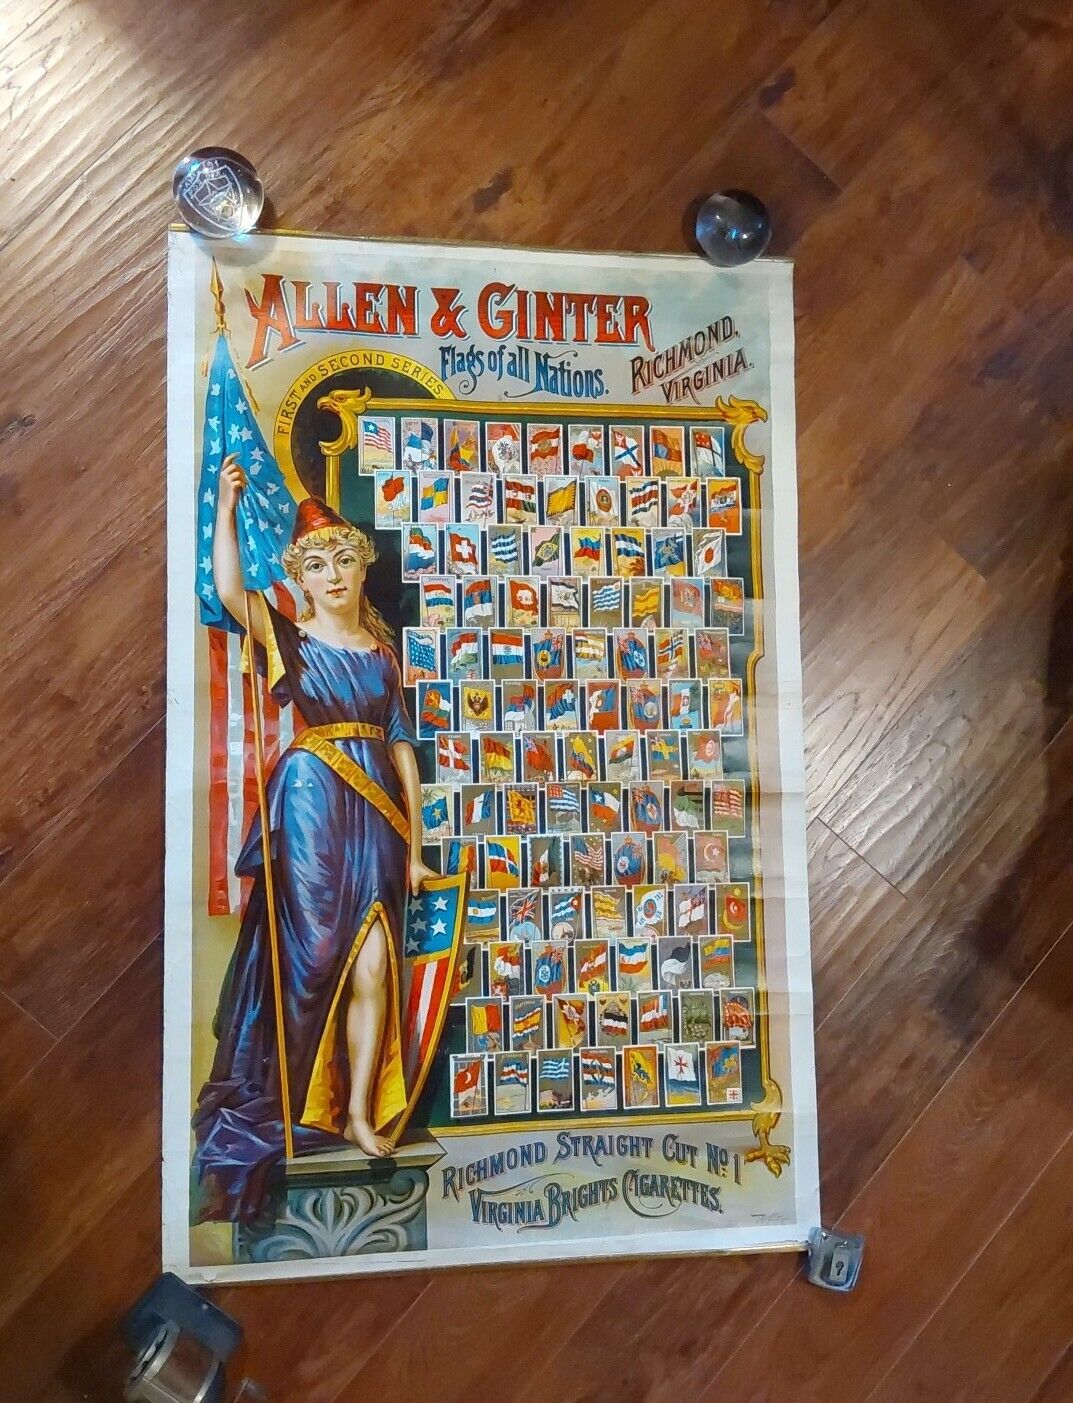 ORIGINAL 1800s Allen & Ginter Flags of All Nations Poster Virginia Brights Cigs